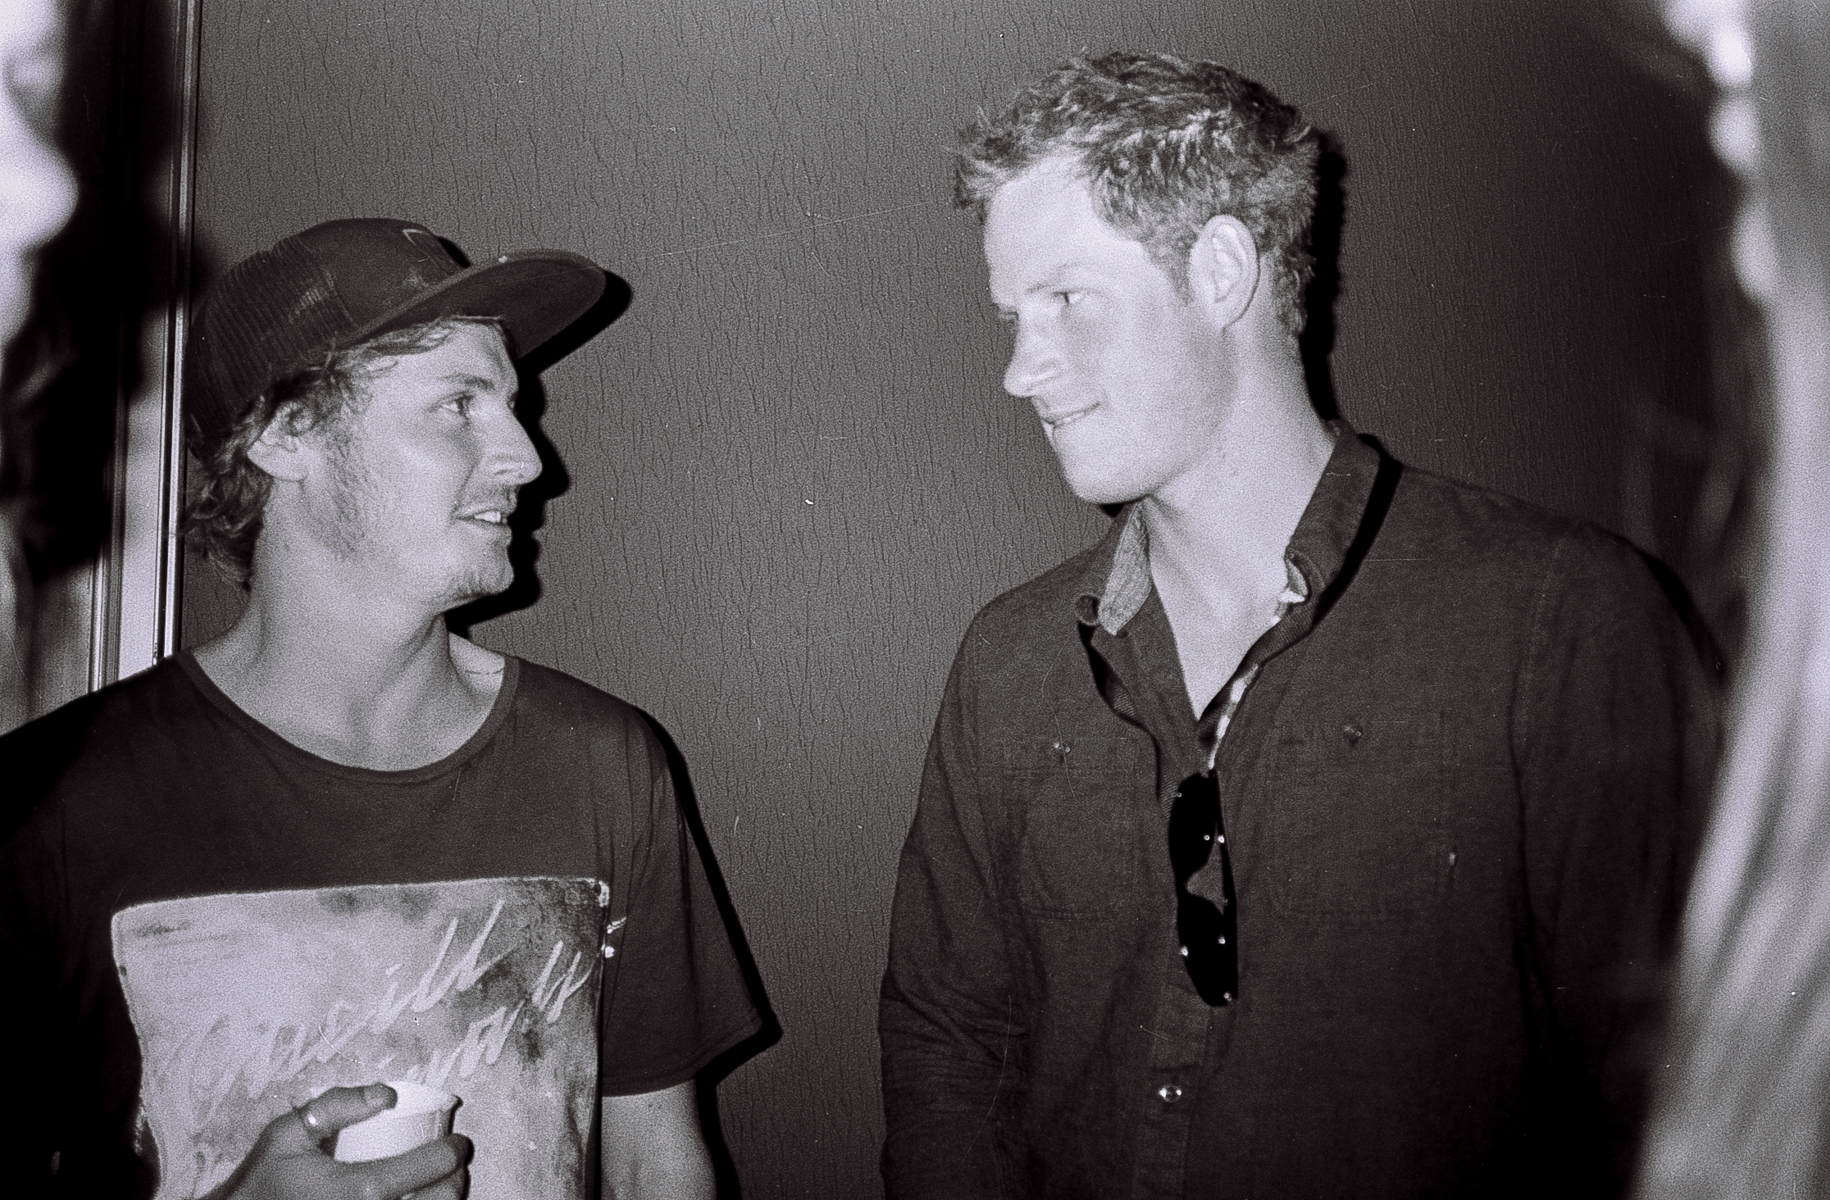  Ben Howard and Prince Harry 